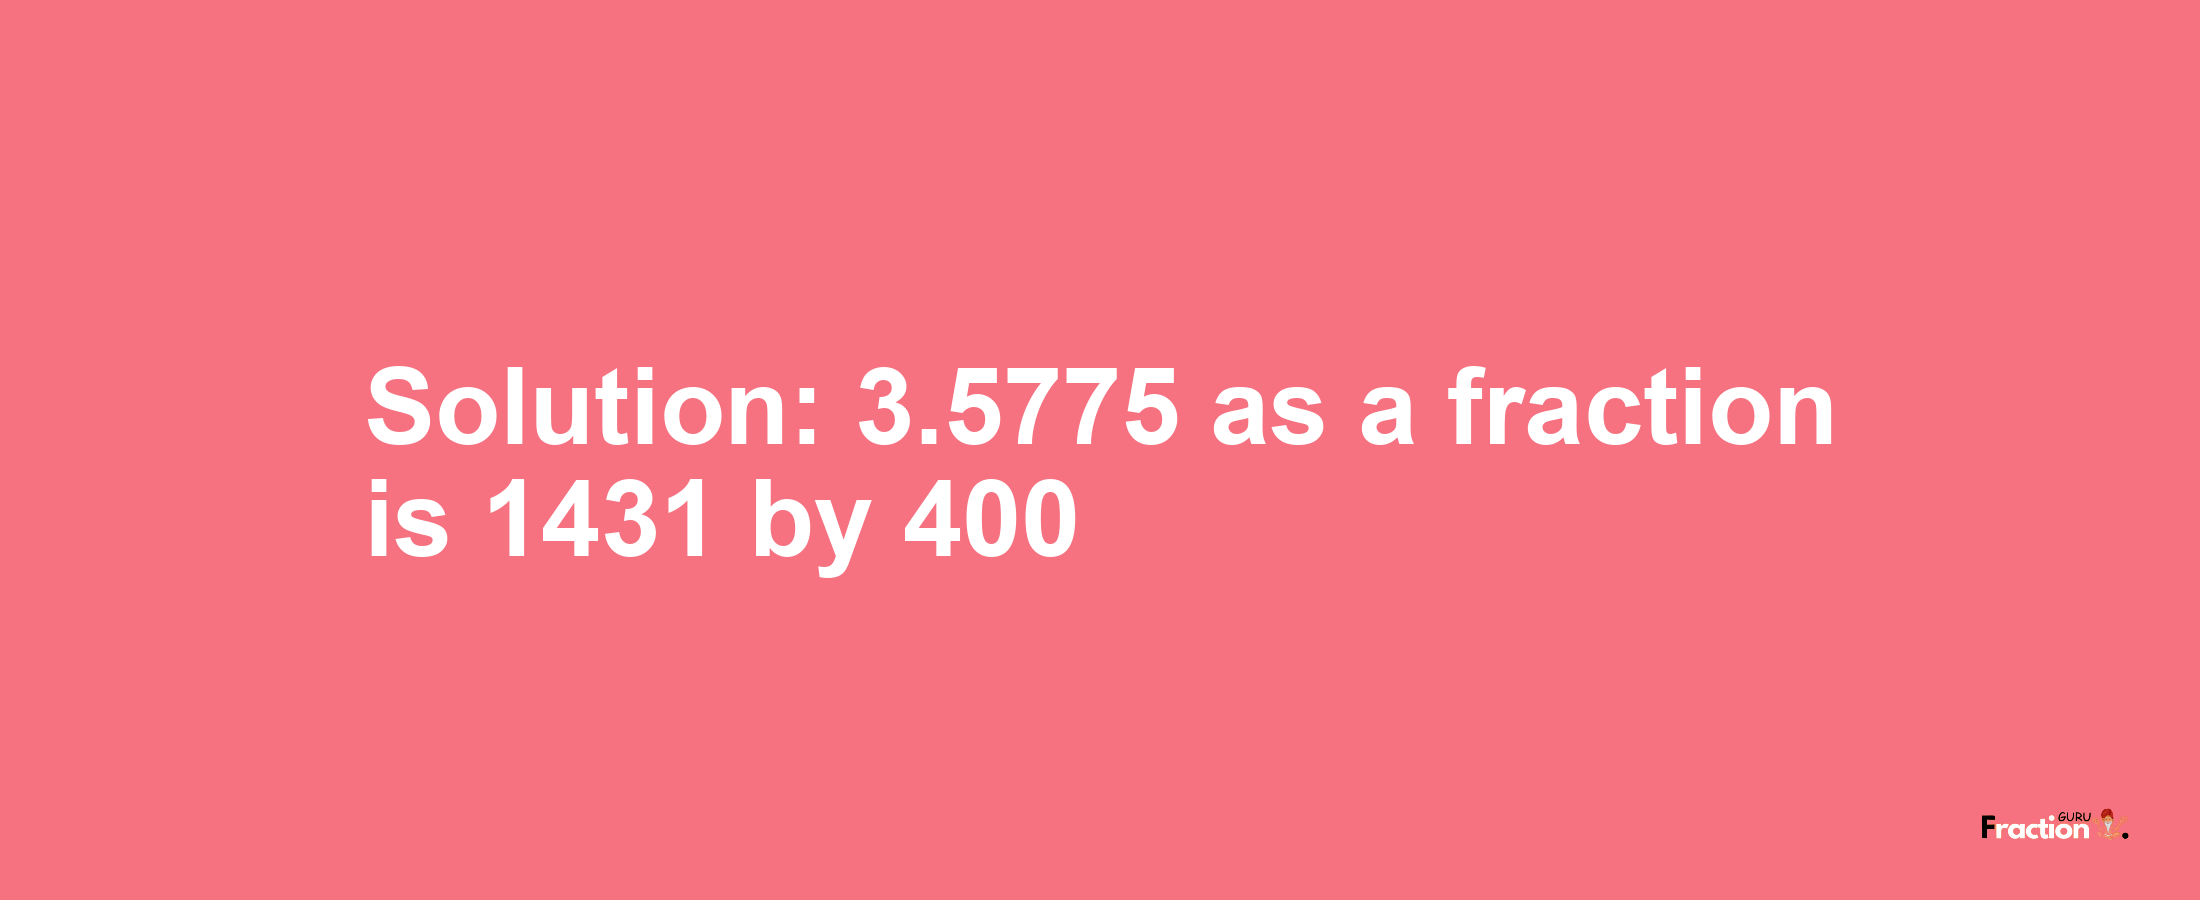 Solution:3.5775 as a fraction is 1431/400